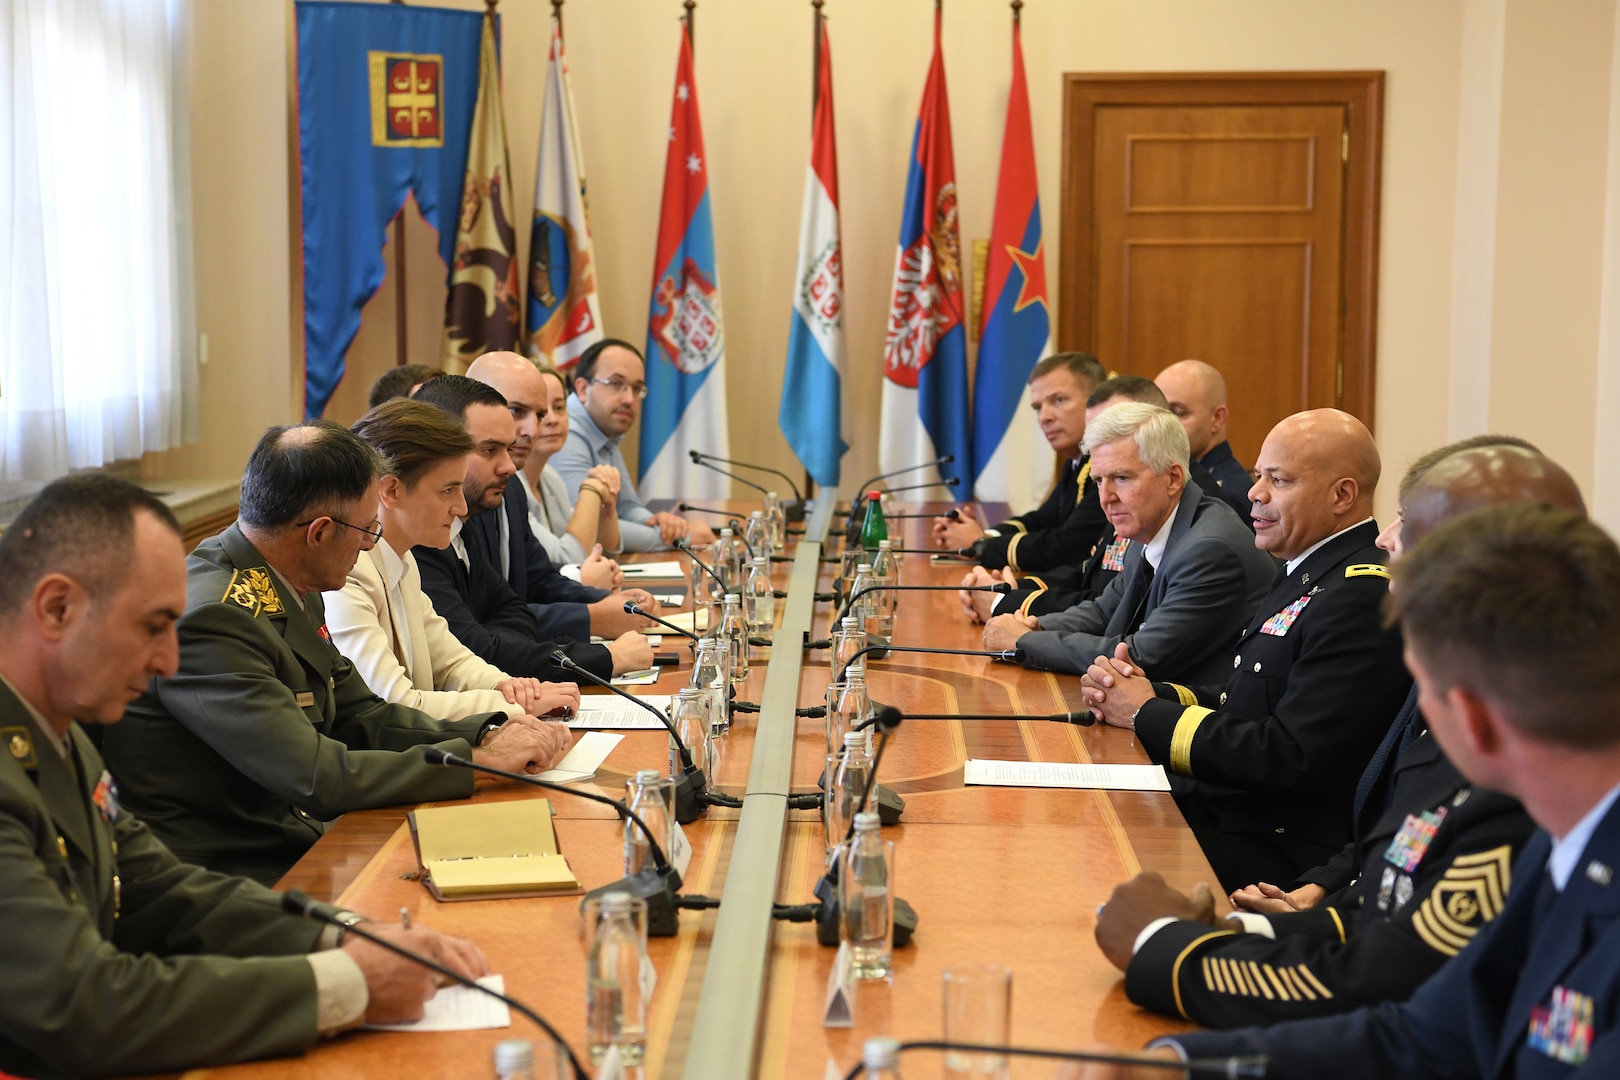 Maj. Gen. John C. Harris Jr. (right), Ohio adjutant general, meets with Serbian Prime Minister Ana Brnabić Sept. 11, 2019, in Belgrade, Serbia. Harris and Brnabić discussed the growing Ohio-Serbia partnership through military-to-military and civil-to-civil exchanges as part of the Department of Defense State Partnership Program.